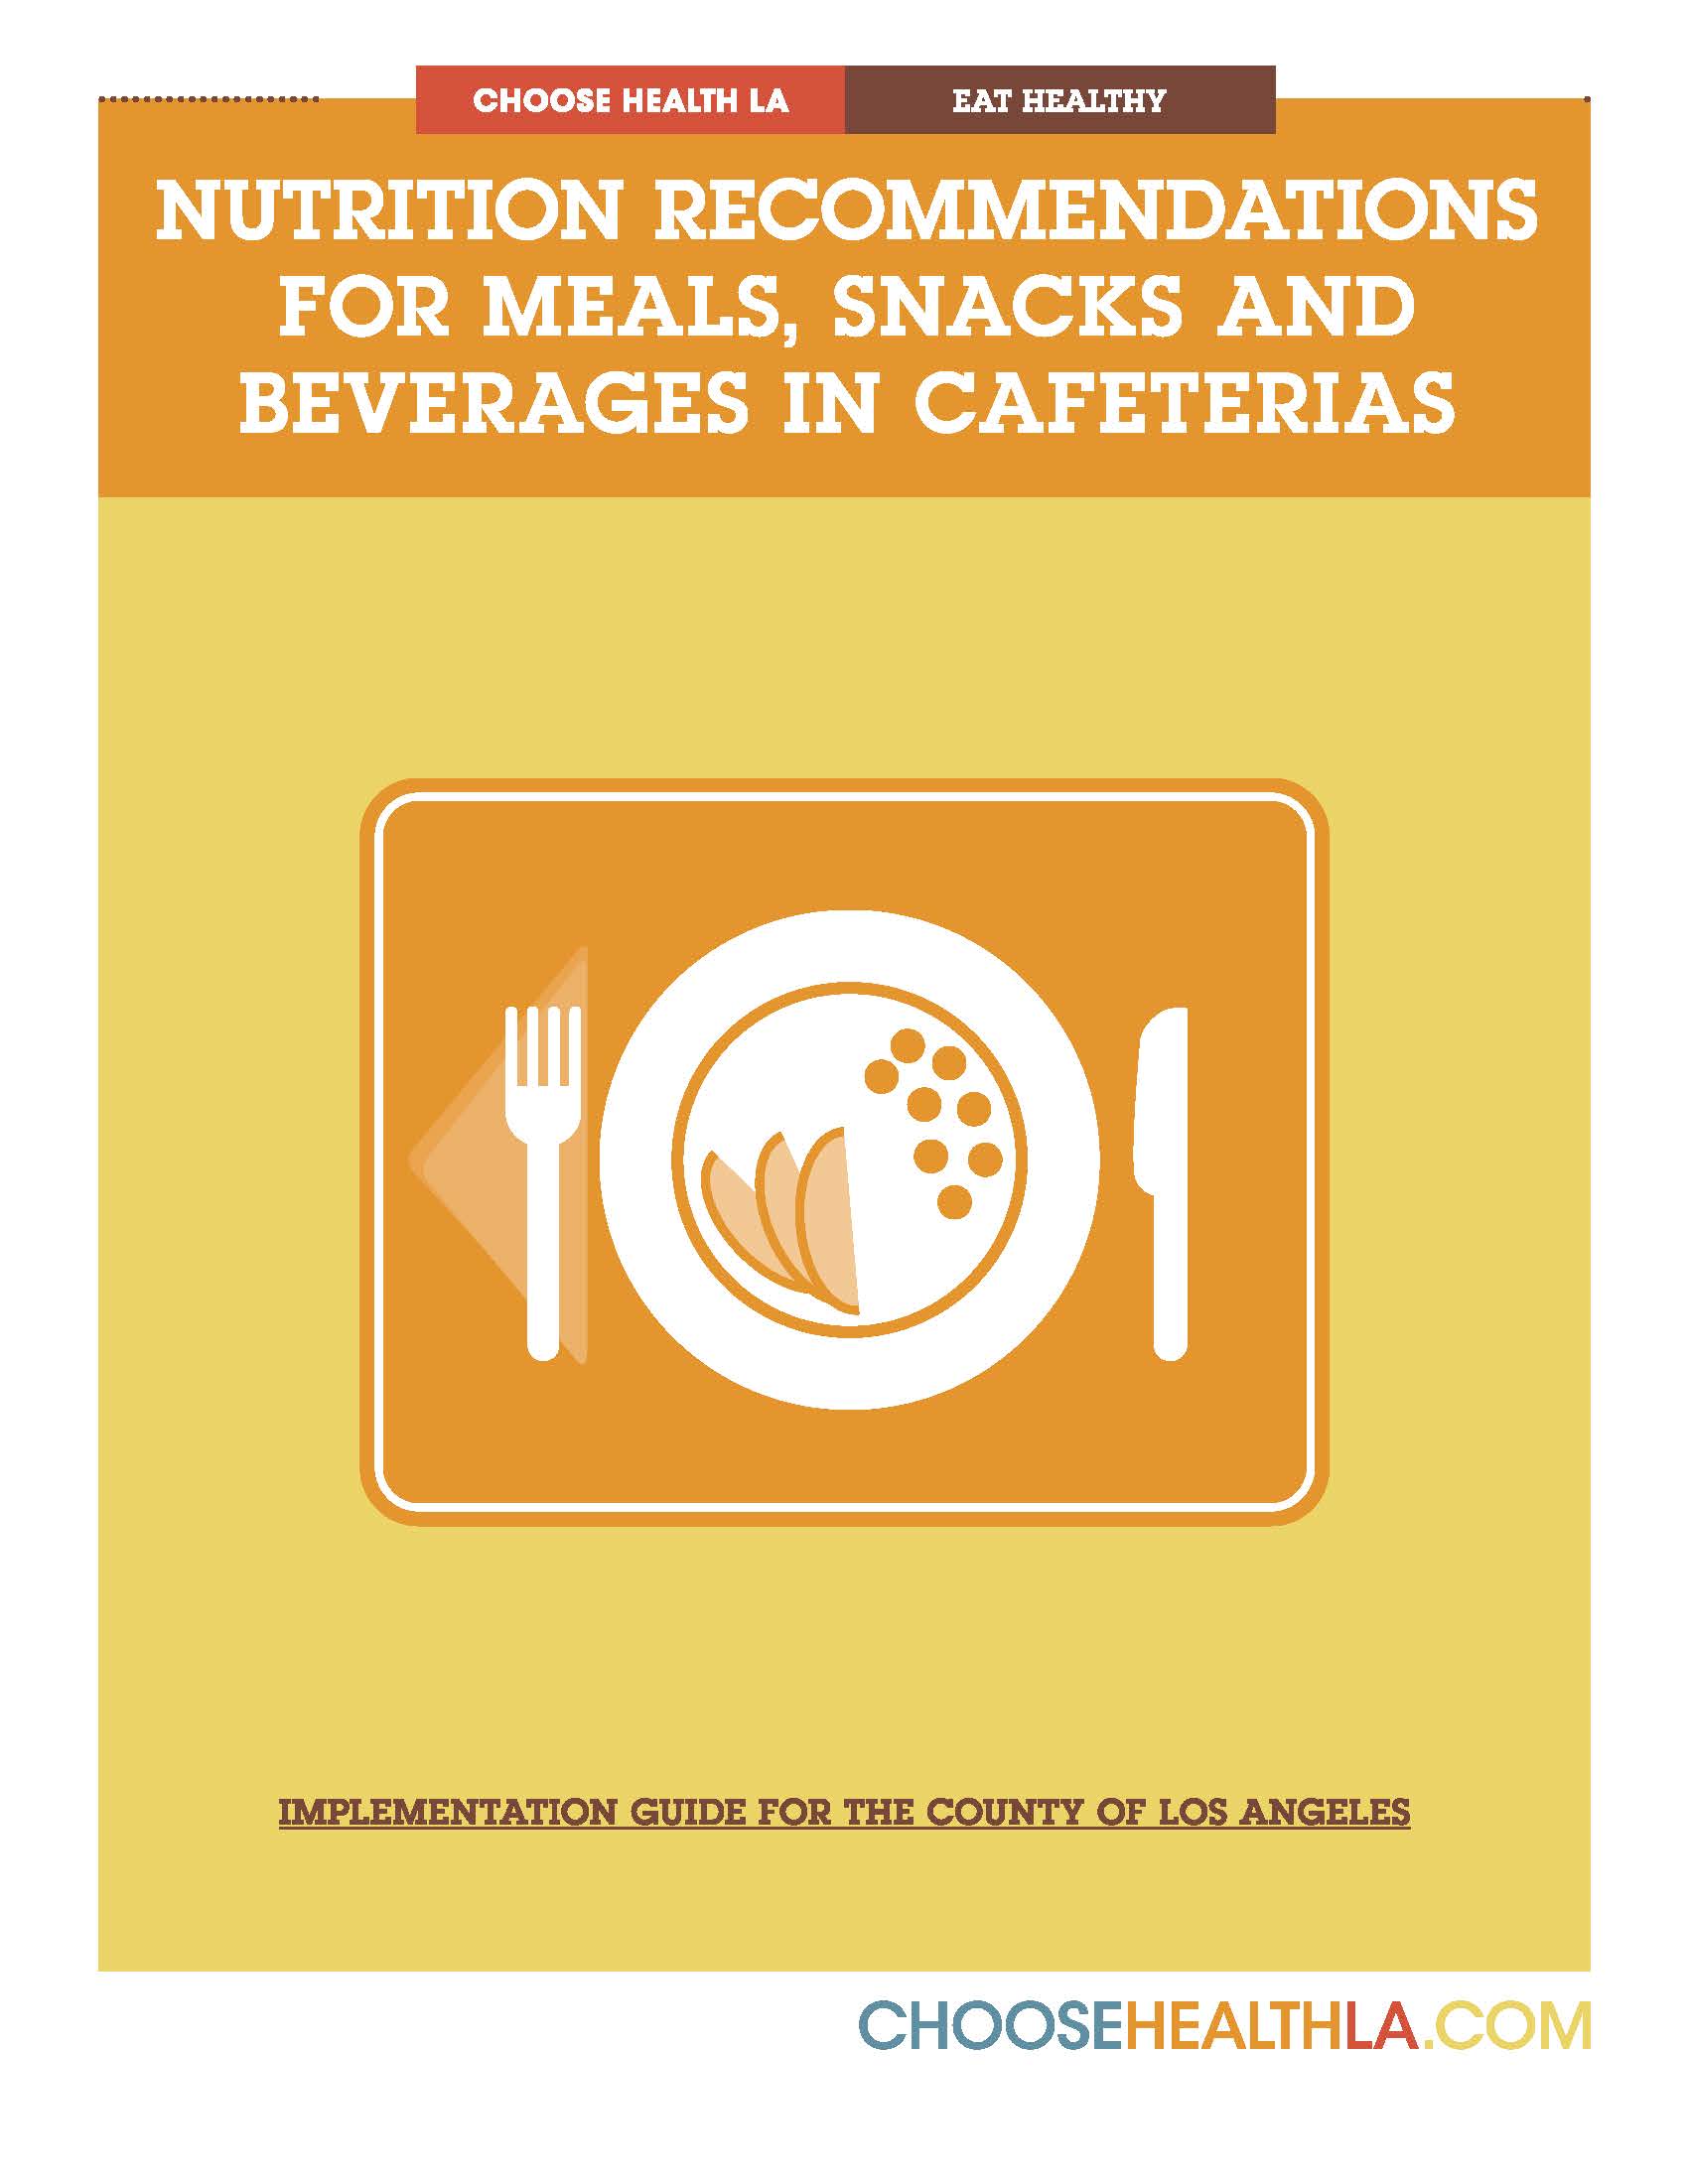 Nutrition Recommendations for Meals, Snacks, and Beverages in Cafeterias